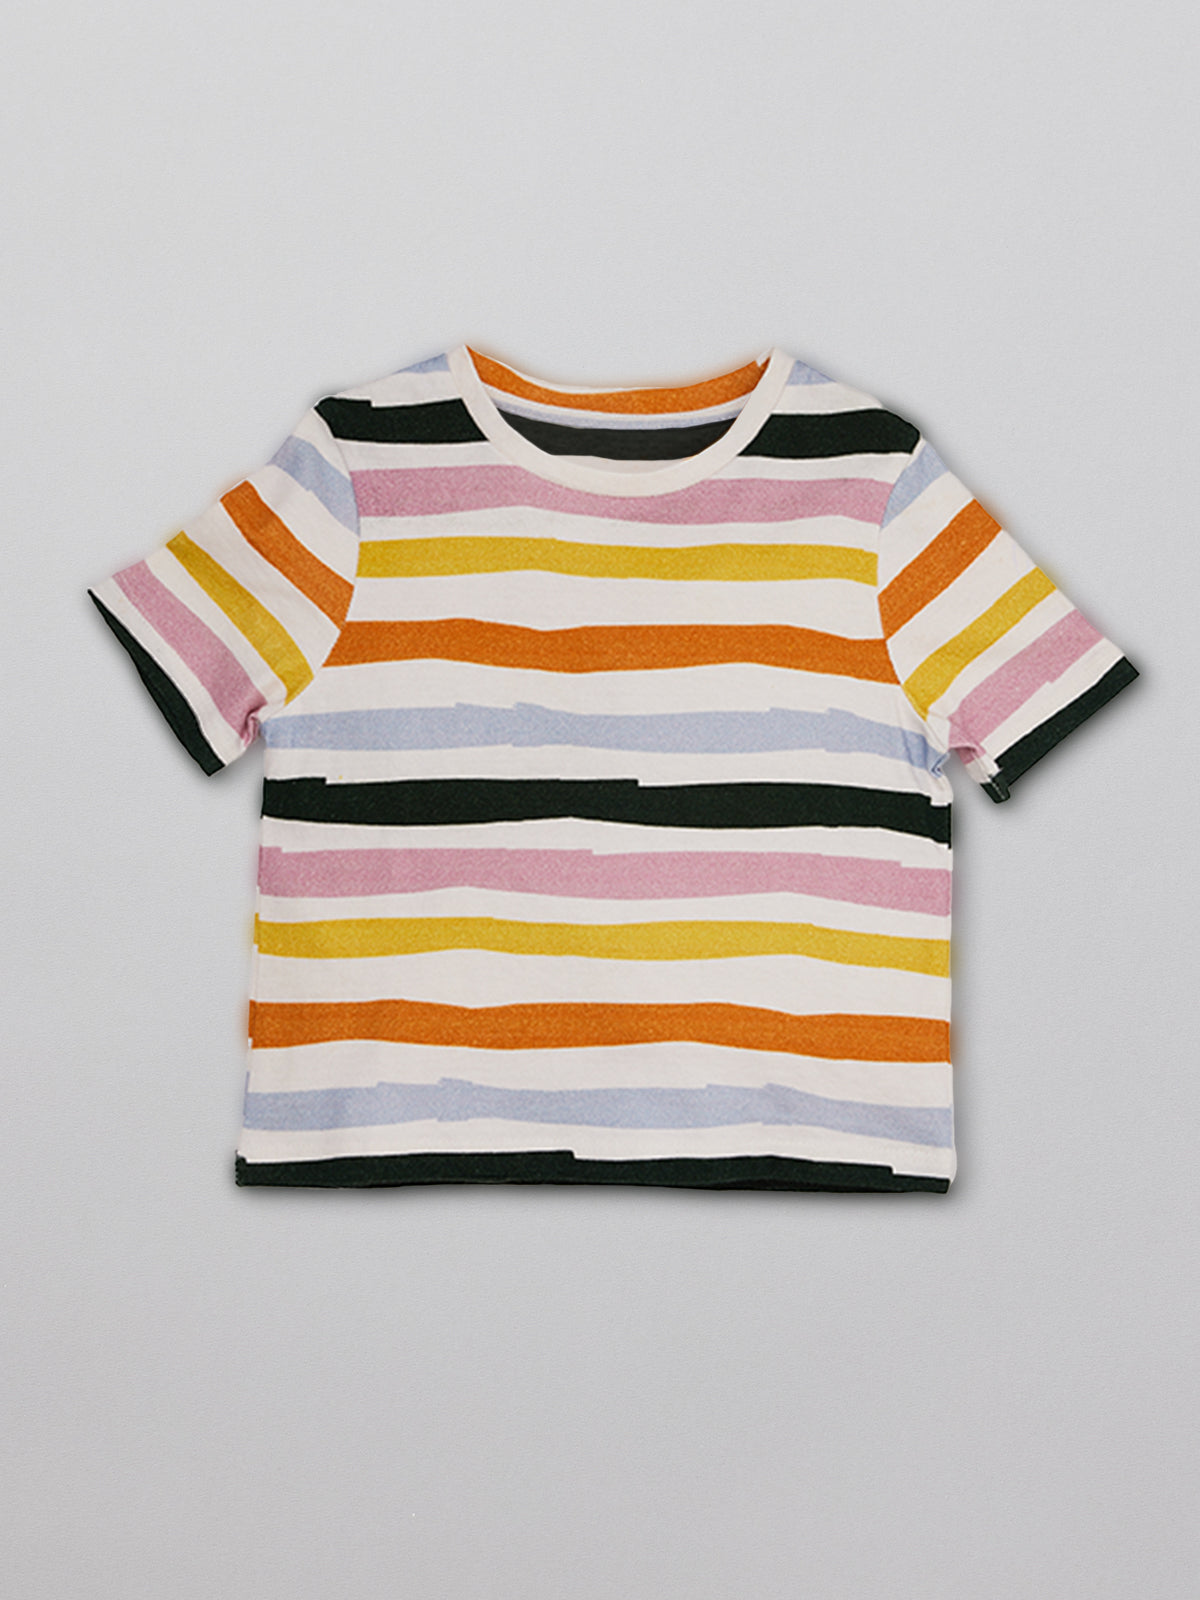 Sustainable unisex kids t-shirt in multicolour stripe, pictured from the front. 